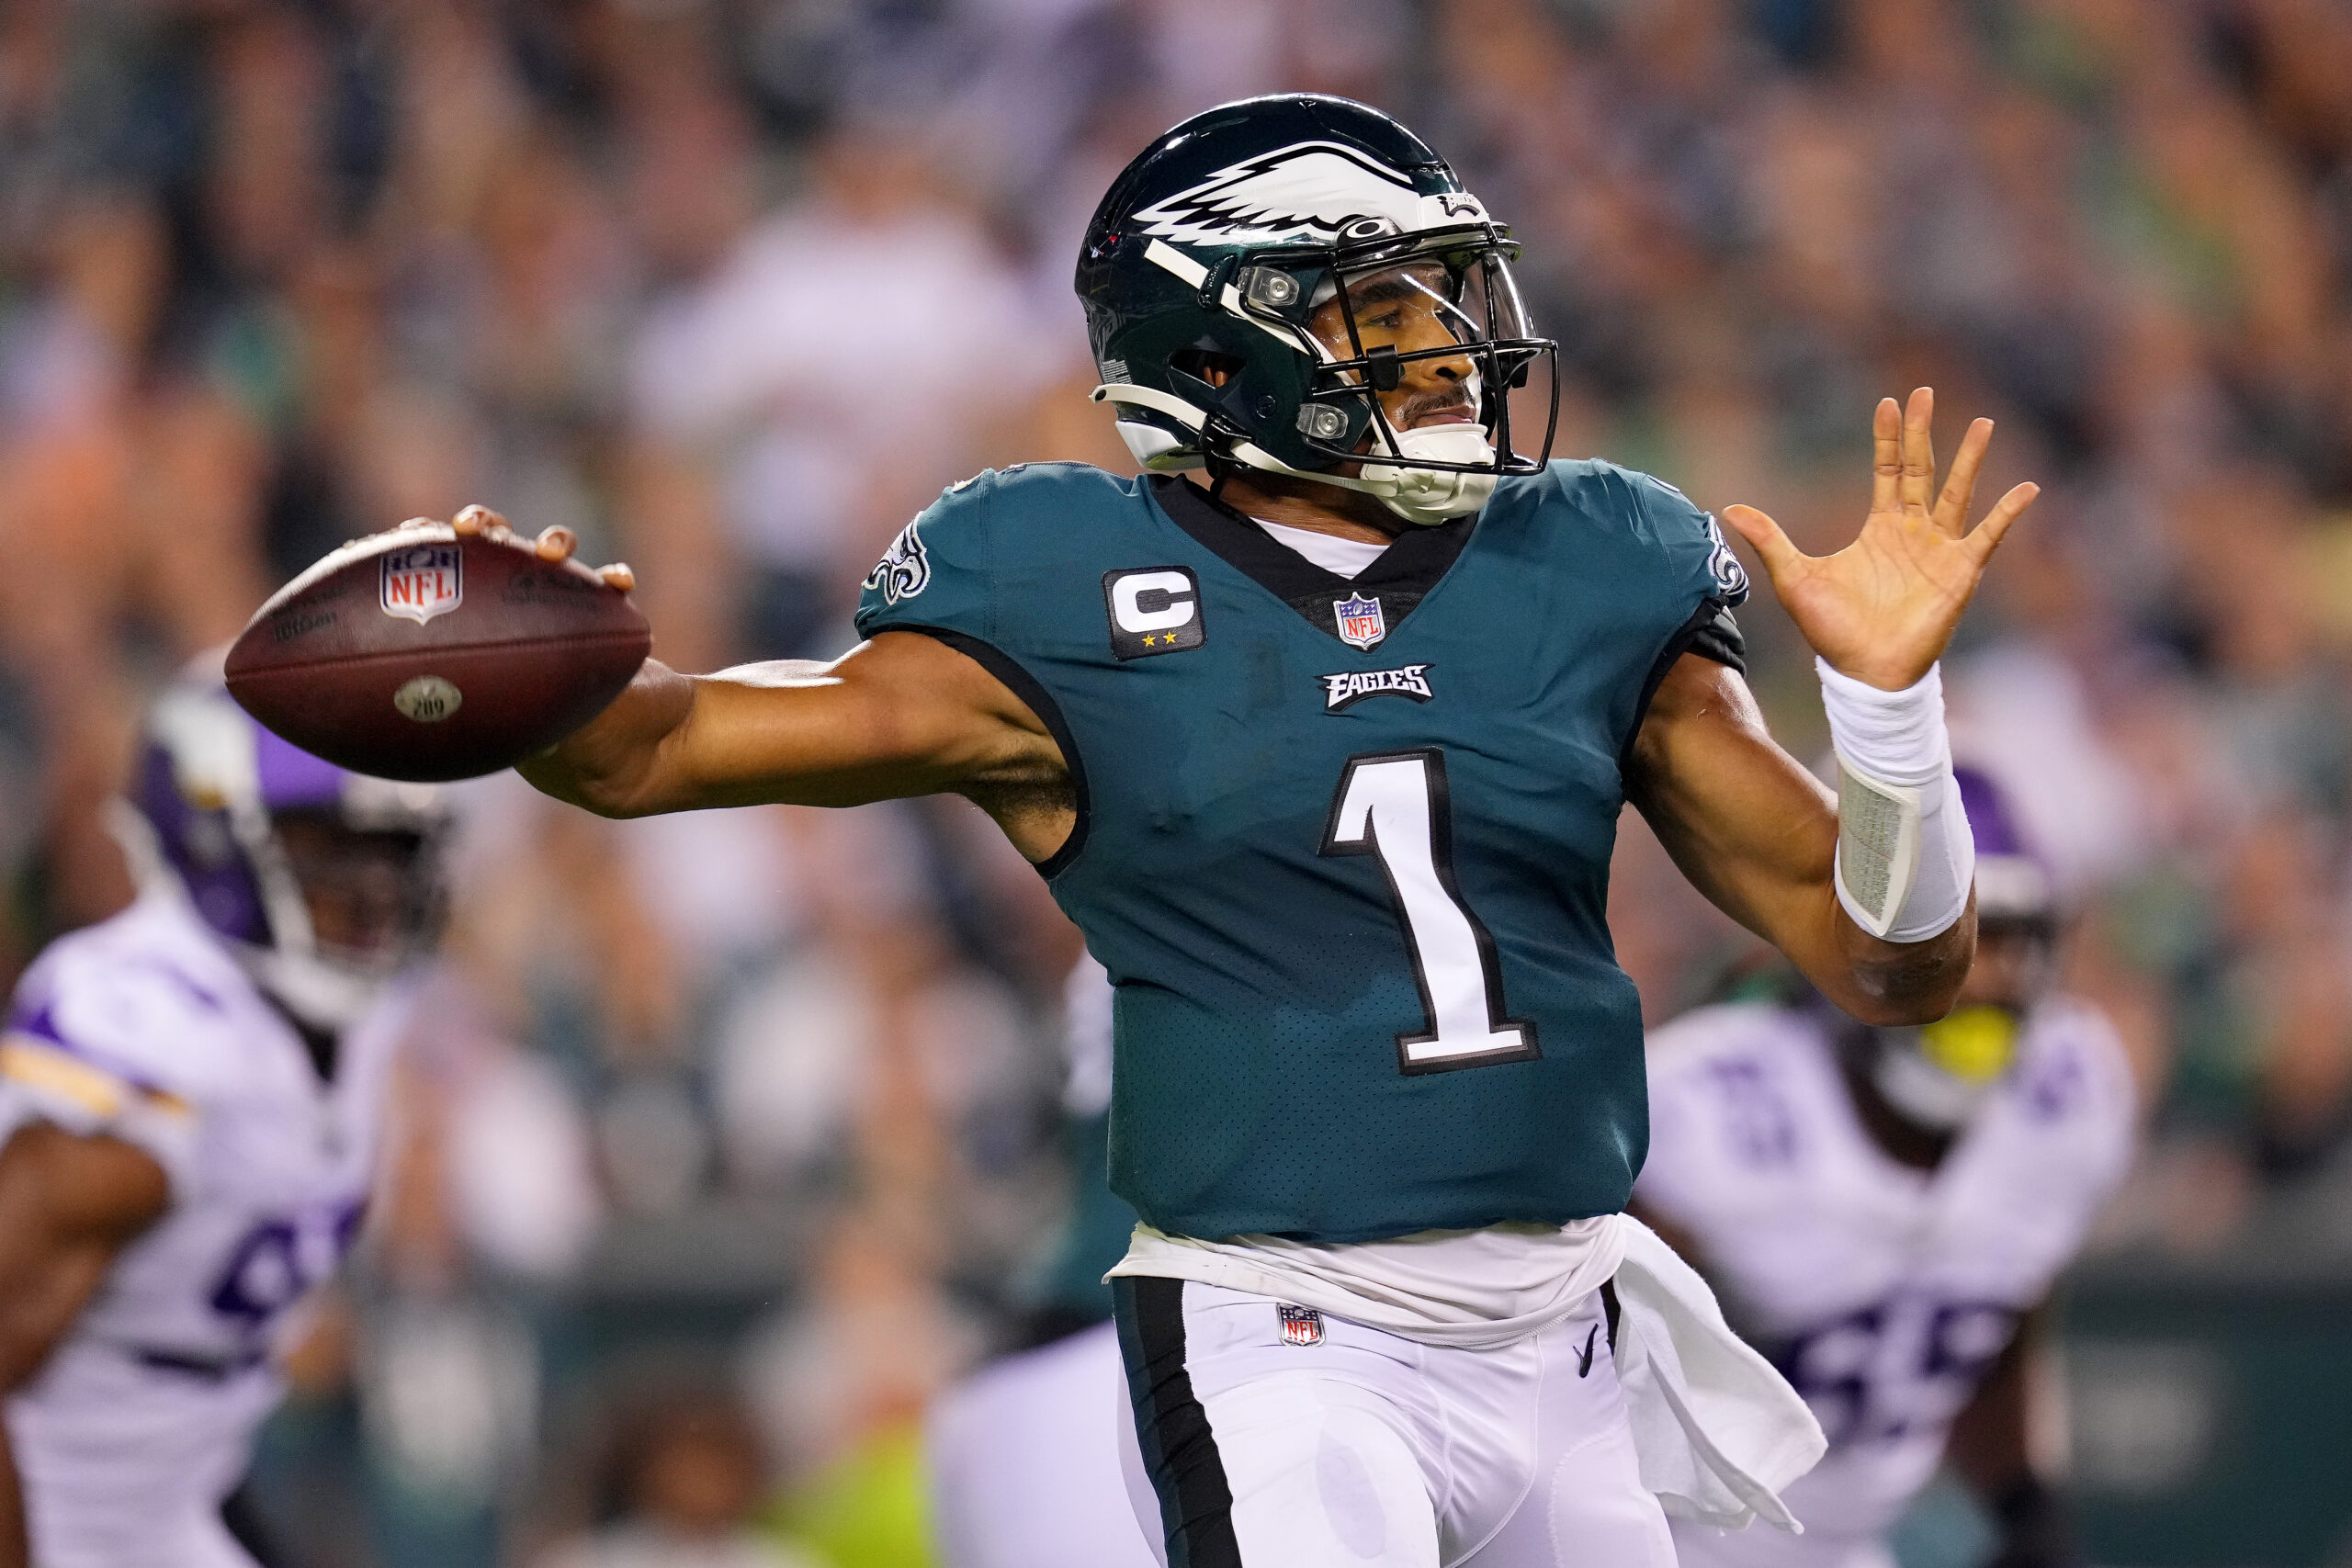 LOOK: Twitter continues to go wild over Jalen Hurts as Eagles destroy Commanders